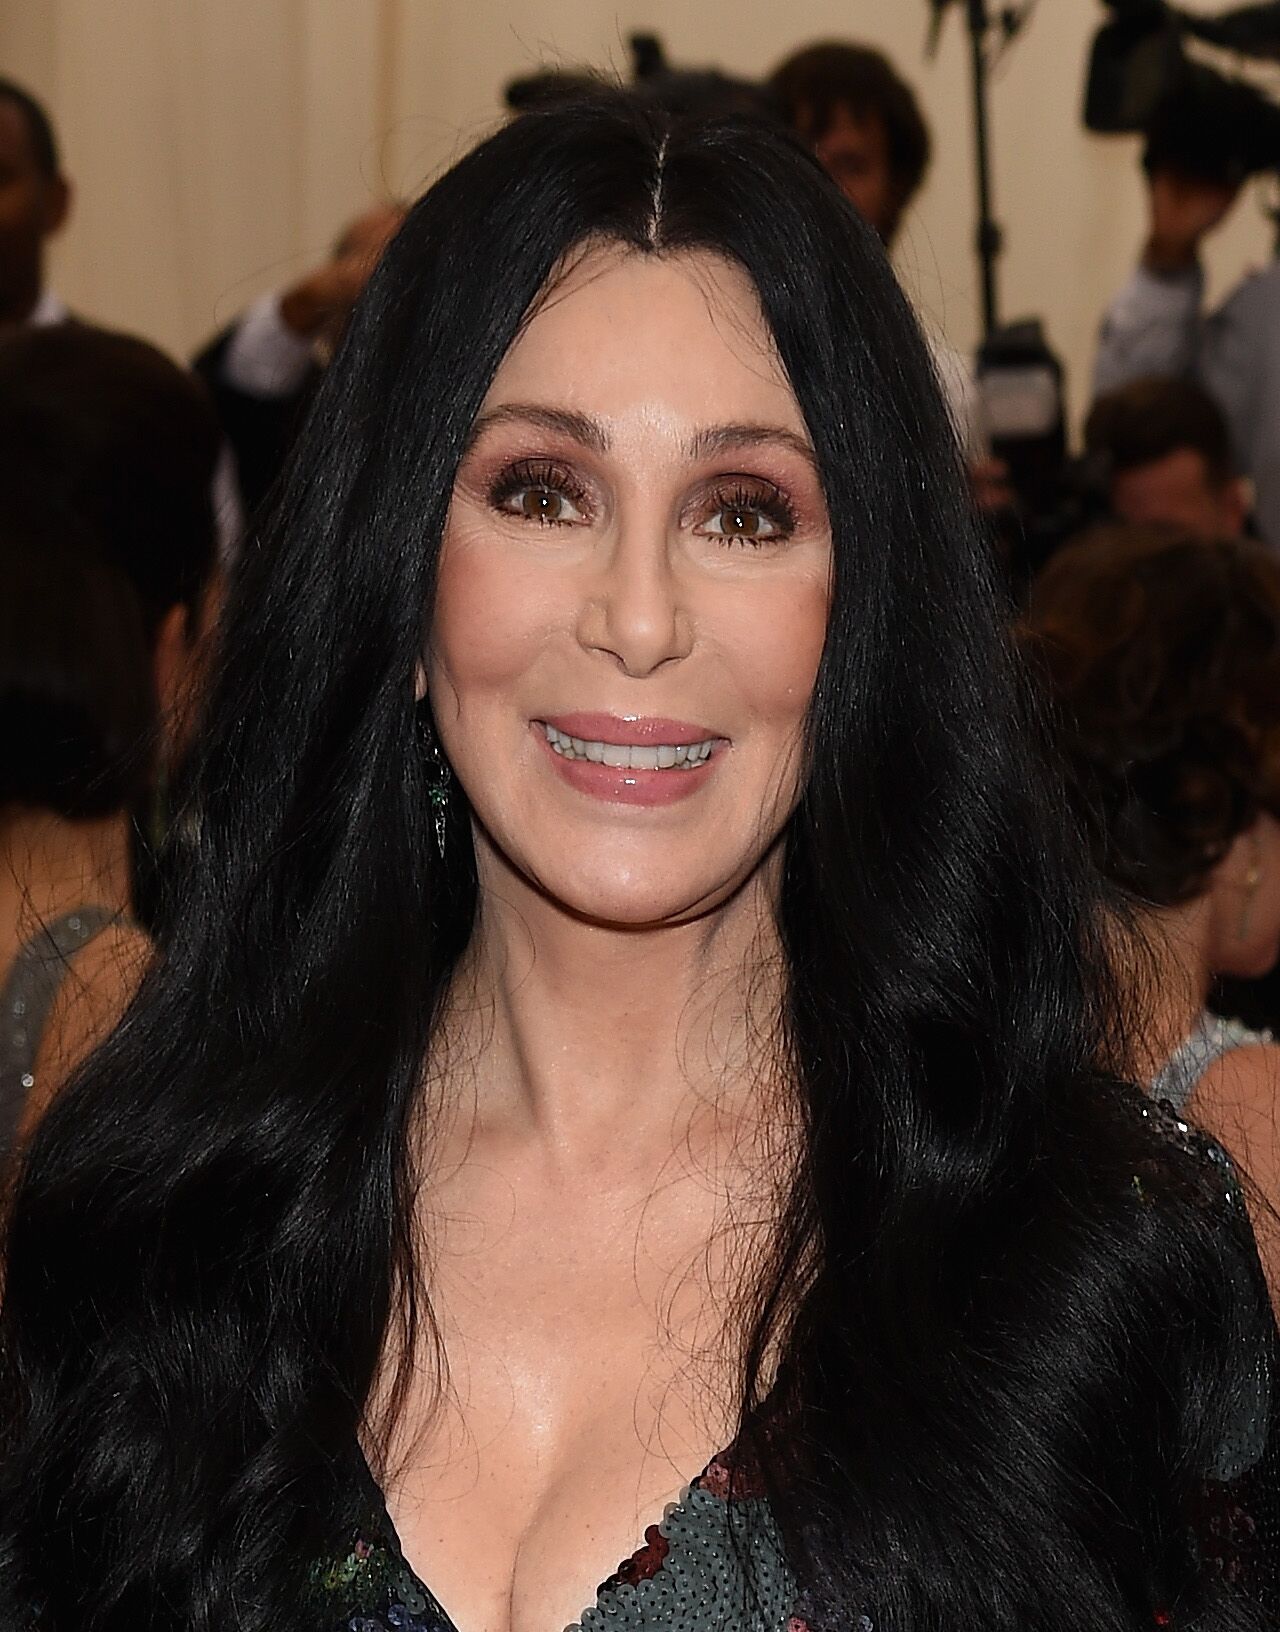 Cher attends the "China: Through The Looking Glass" Costume Institute Benefit Gala  | Getty Images